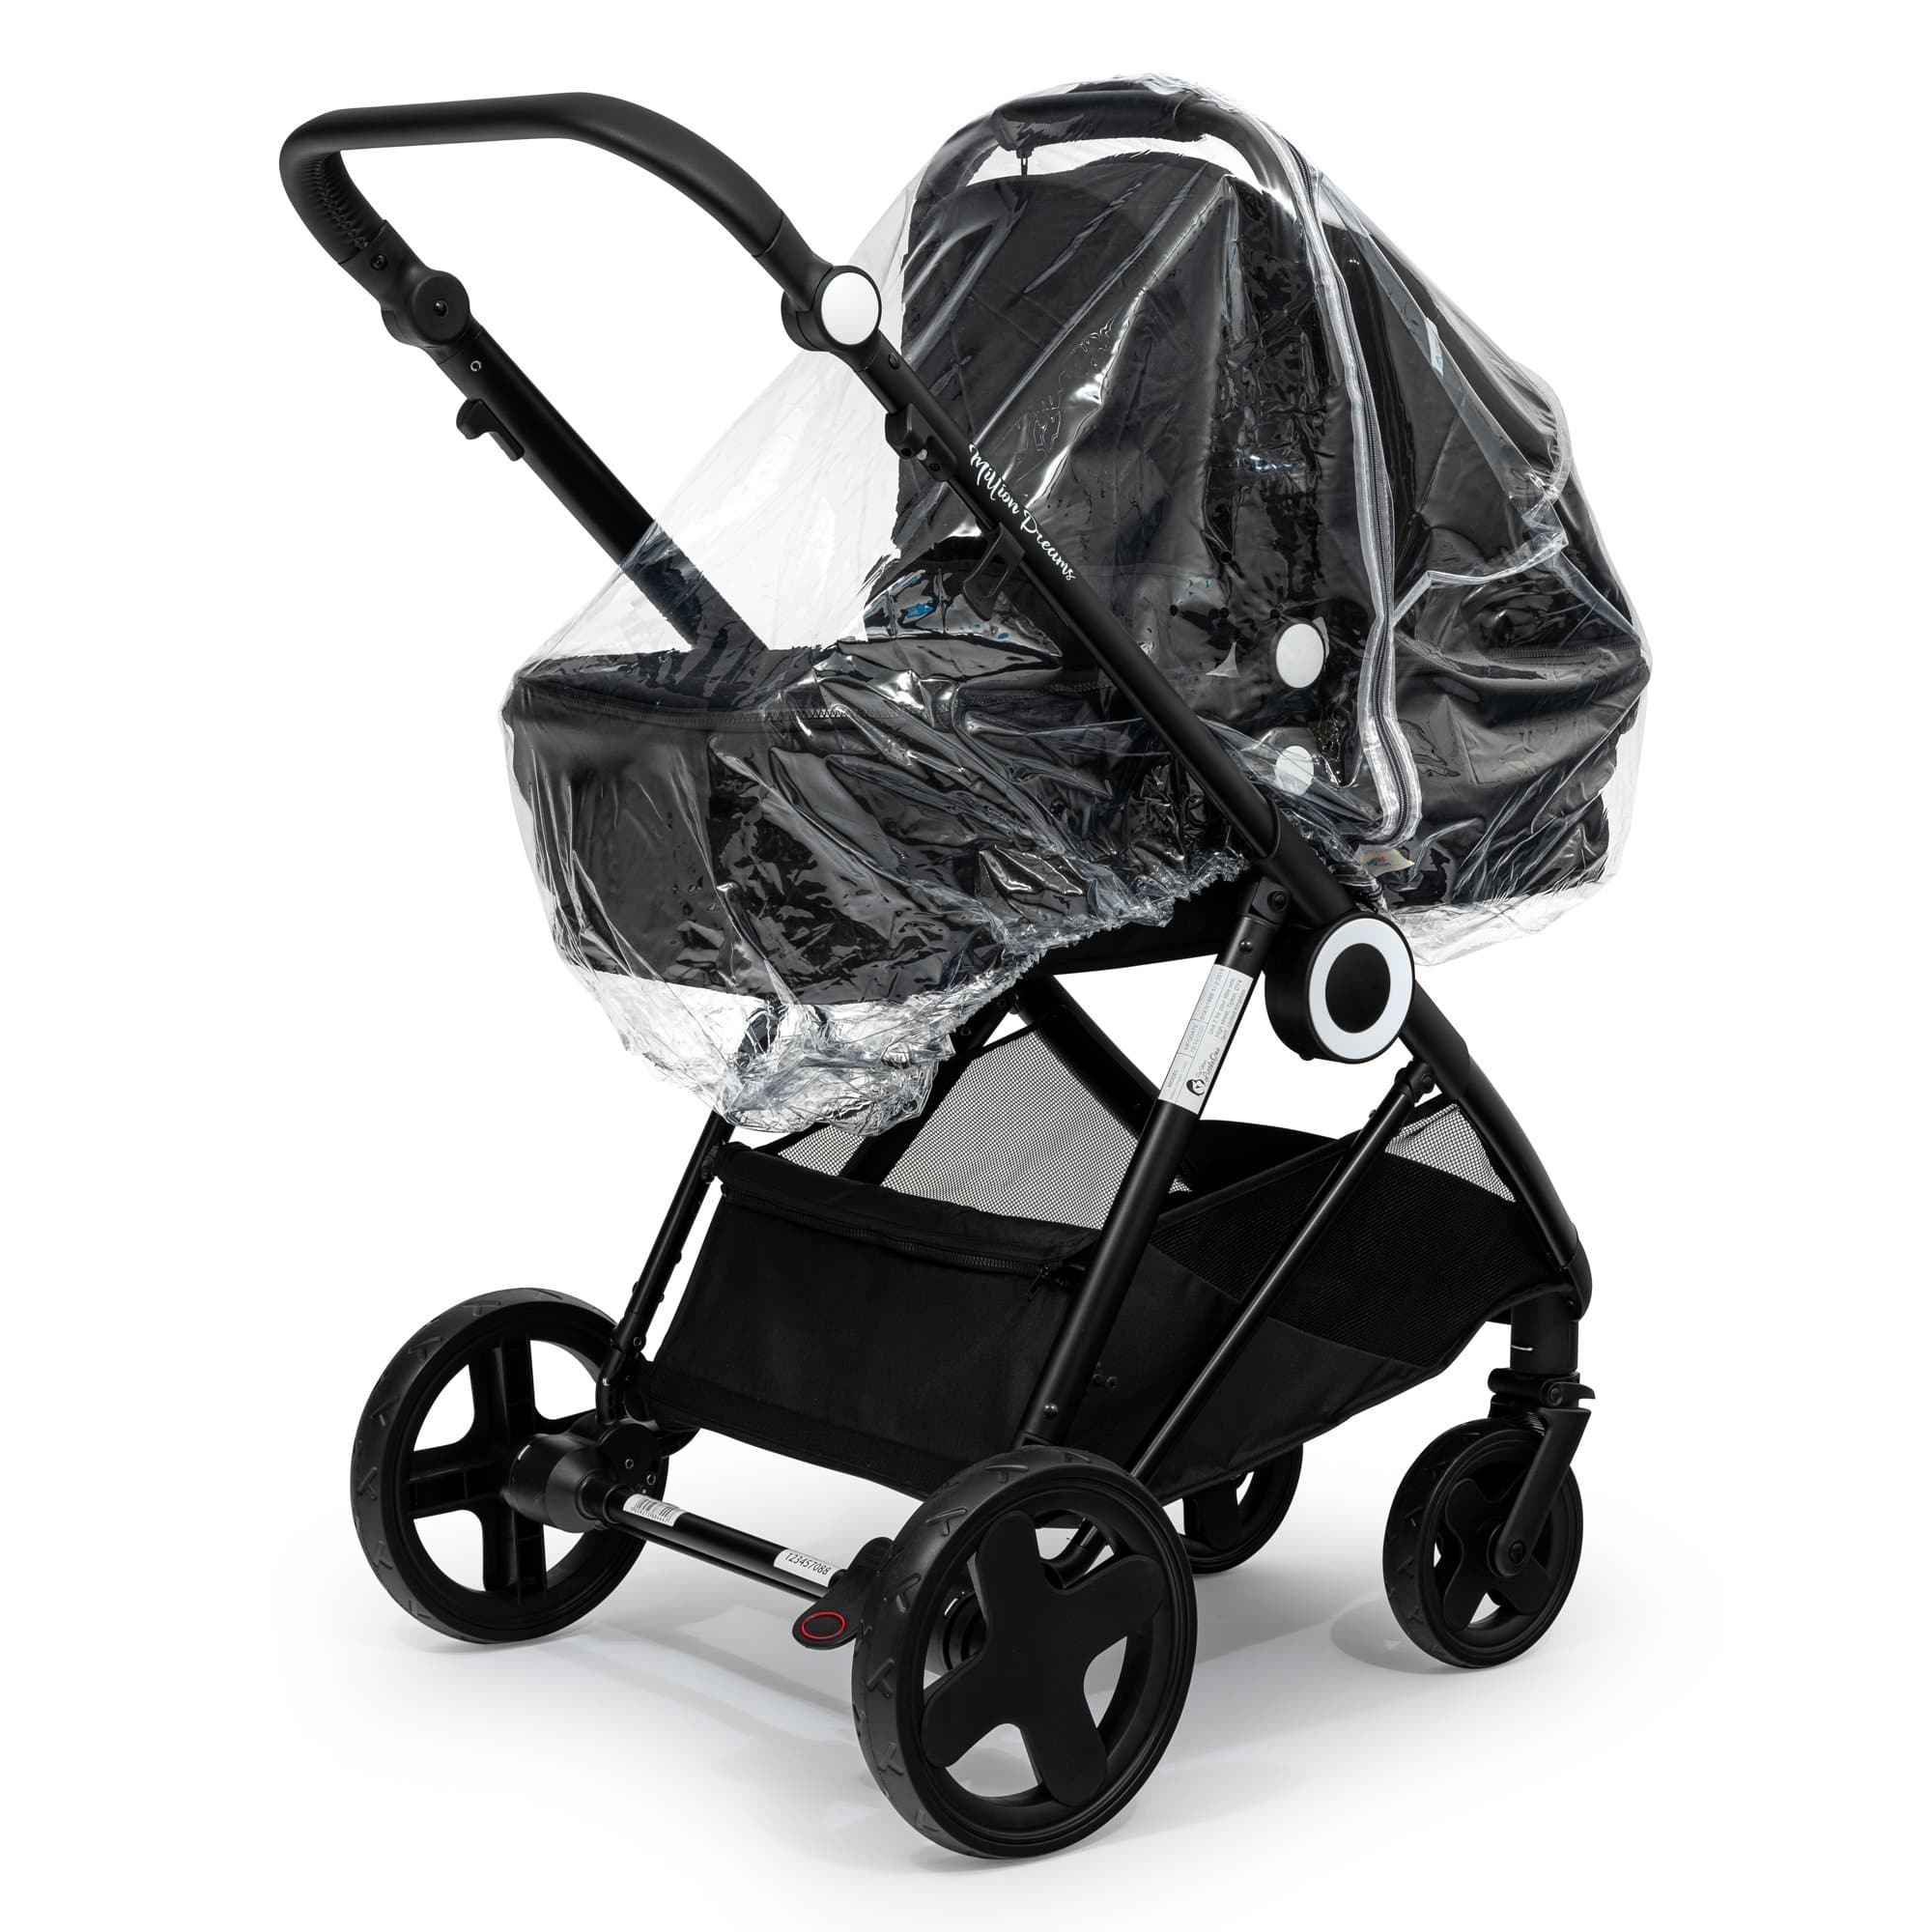 2 in 1 Rain Cover Compatible with Red Kite - Fits All Models - For Your Little One